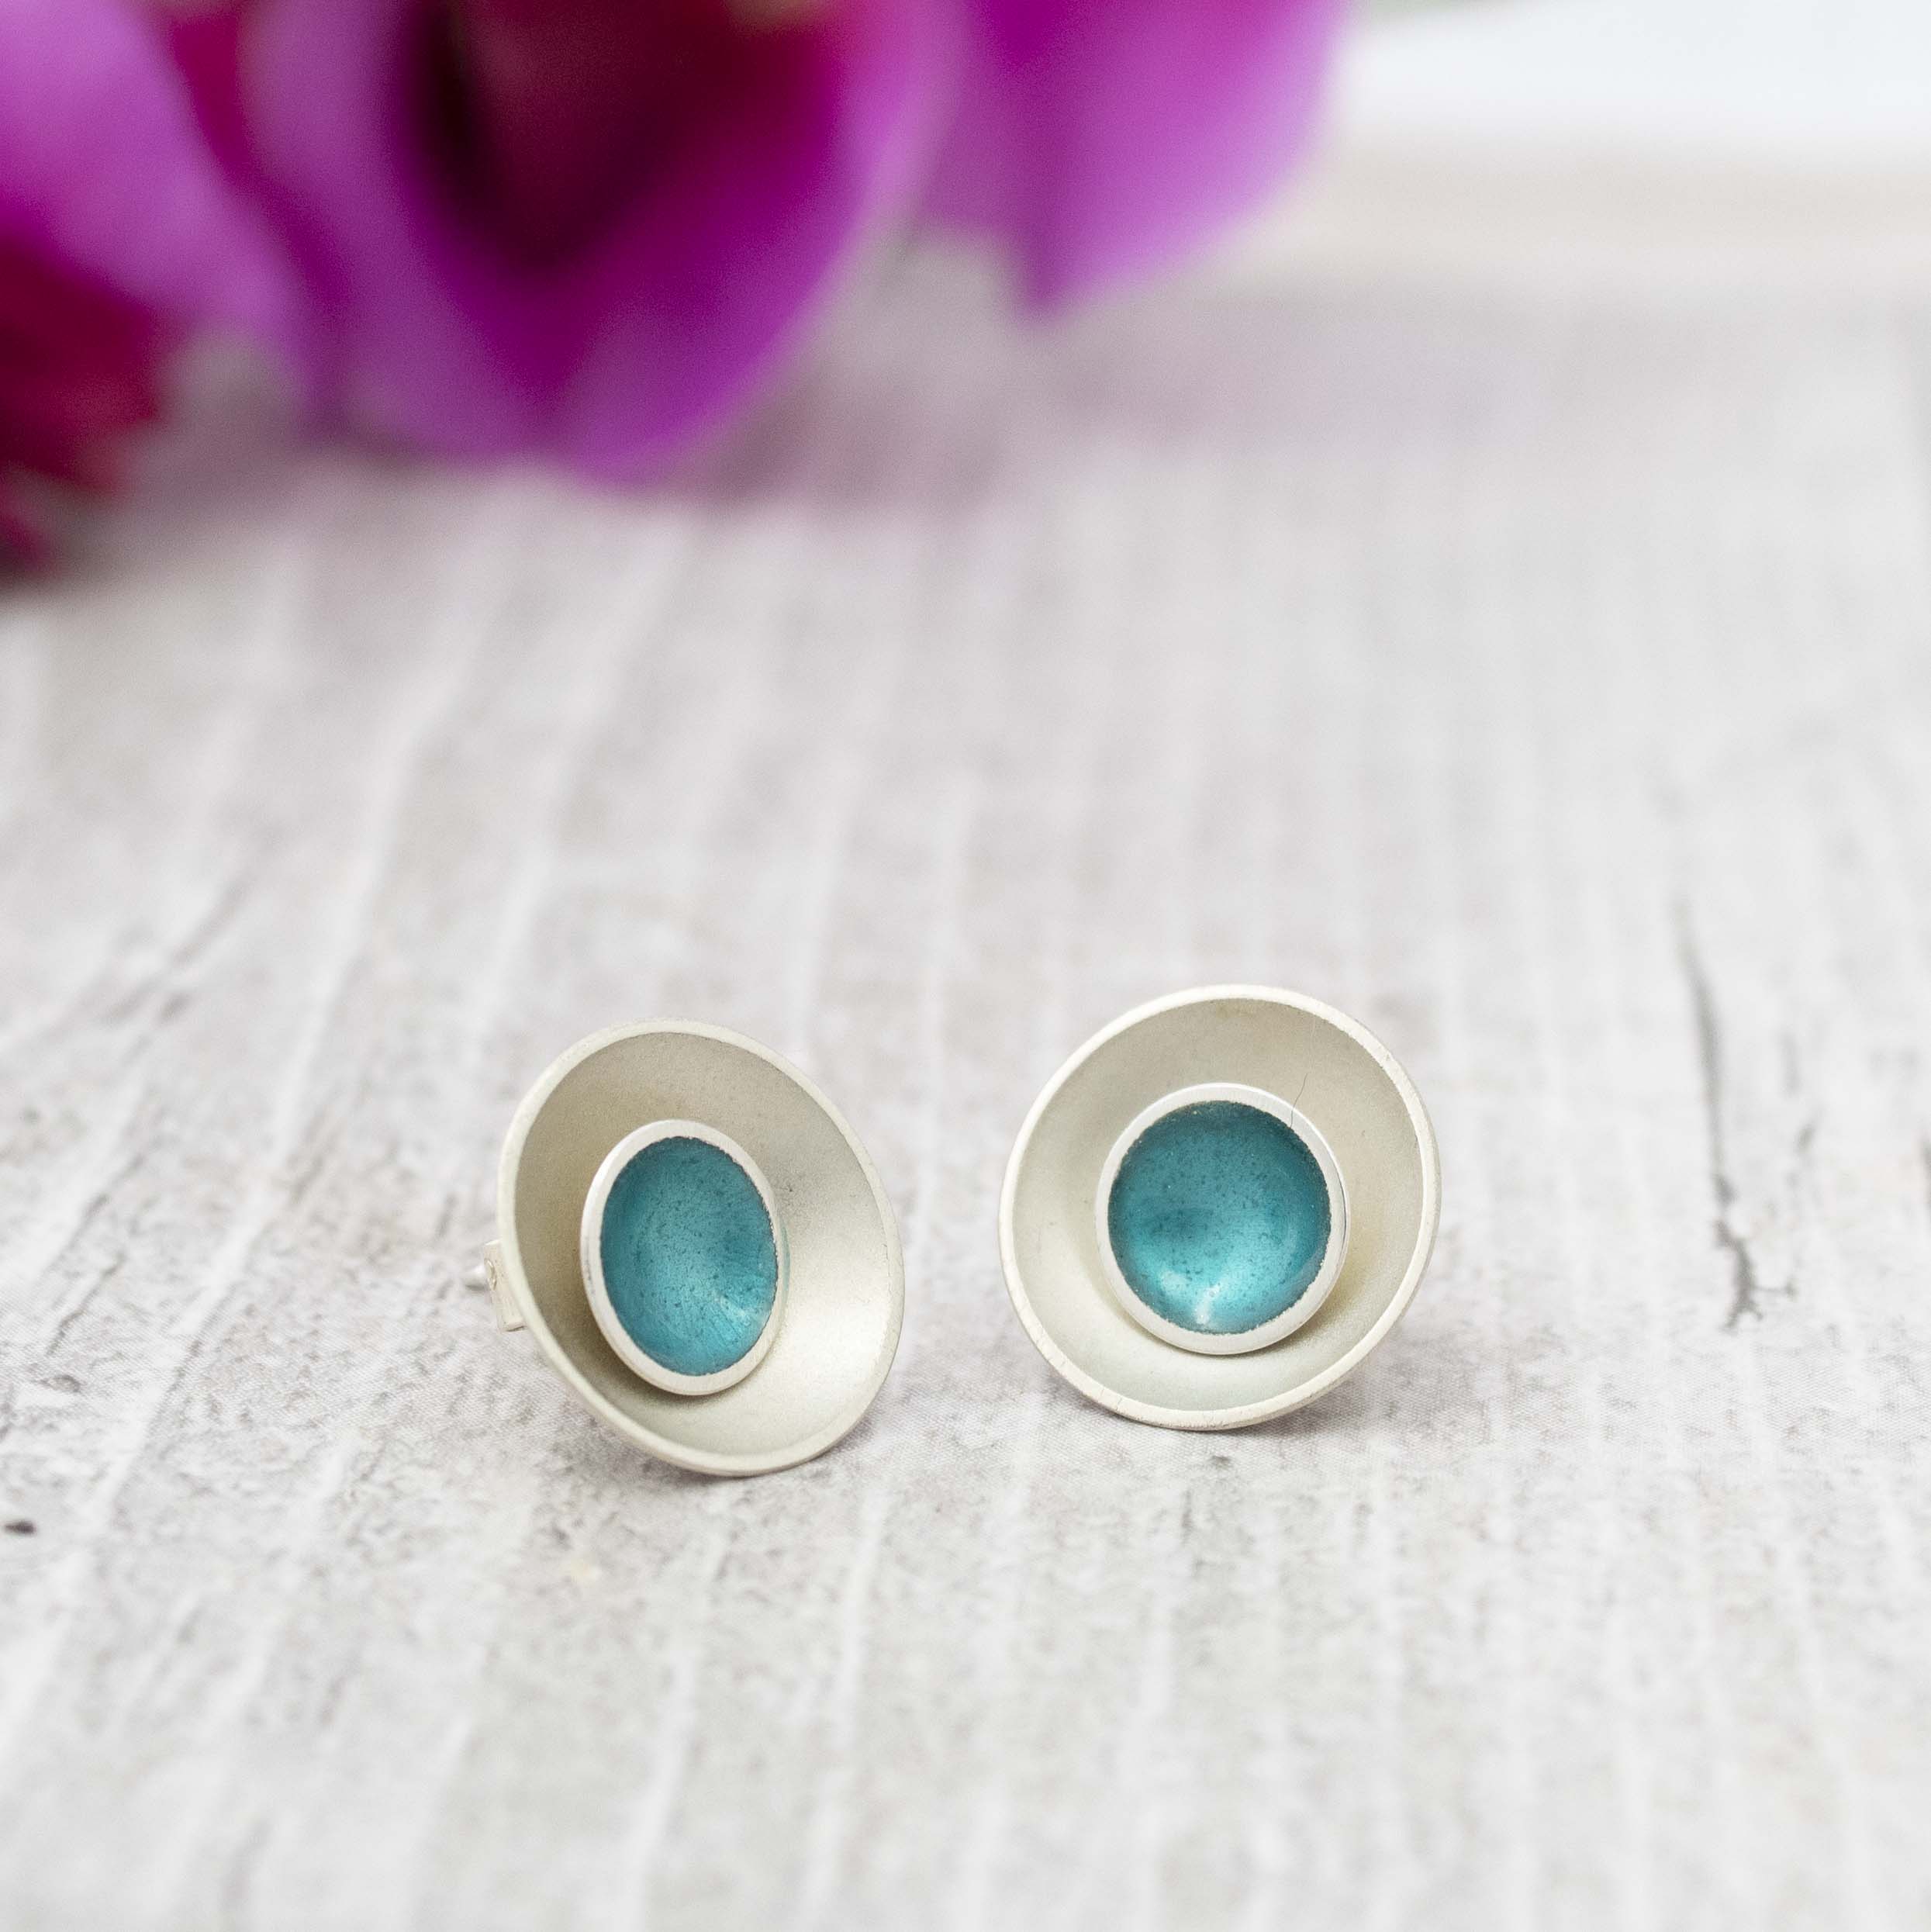 Halo Two-in-One Silver and Enamel Stud Earrings - Large